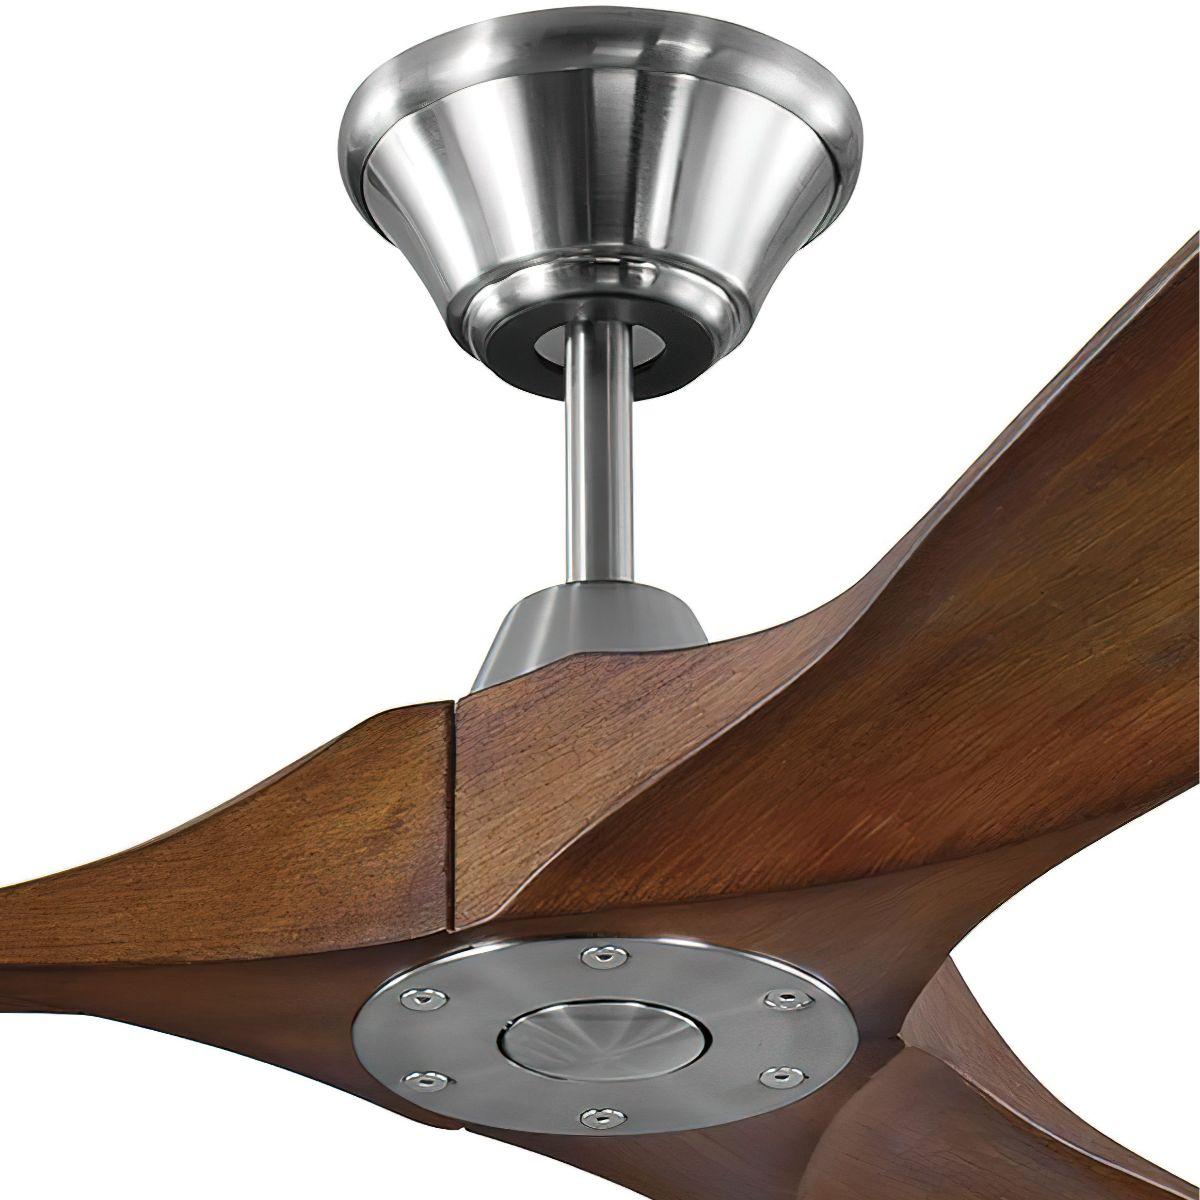 Maverick 60 Inch Propeller Outdoor Ceiling Fan With Remote